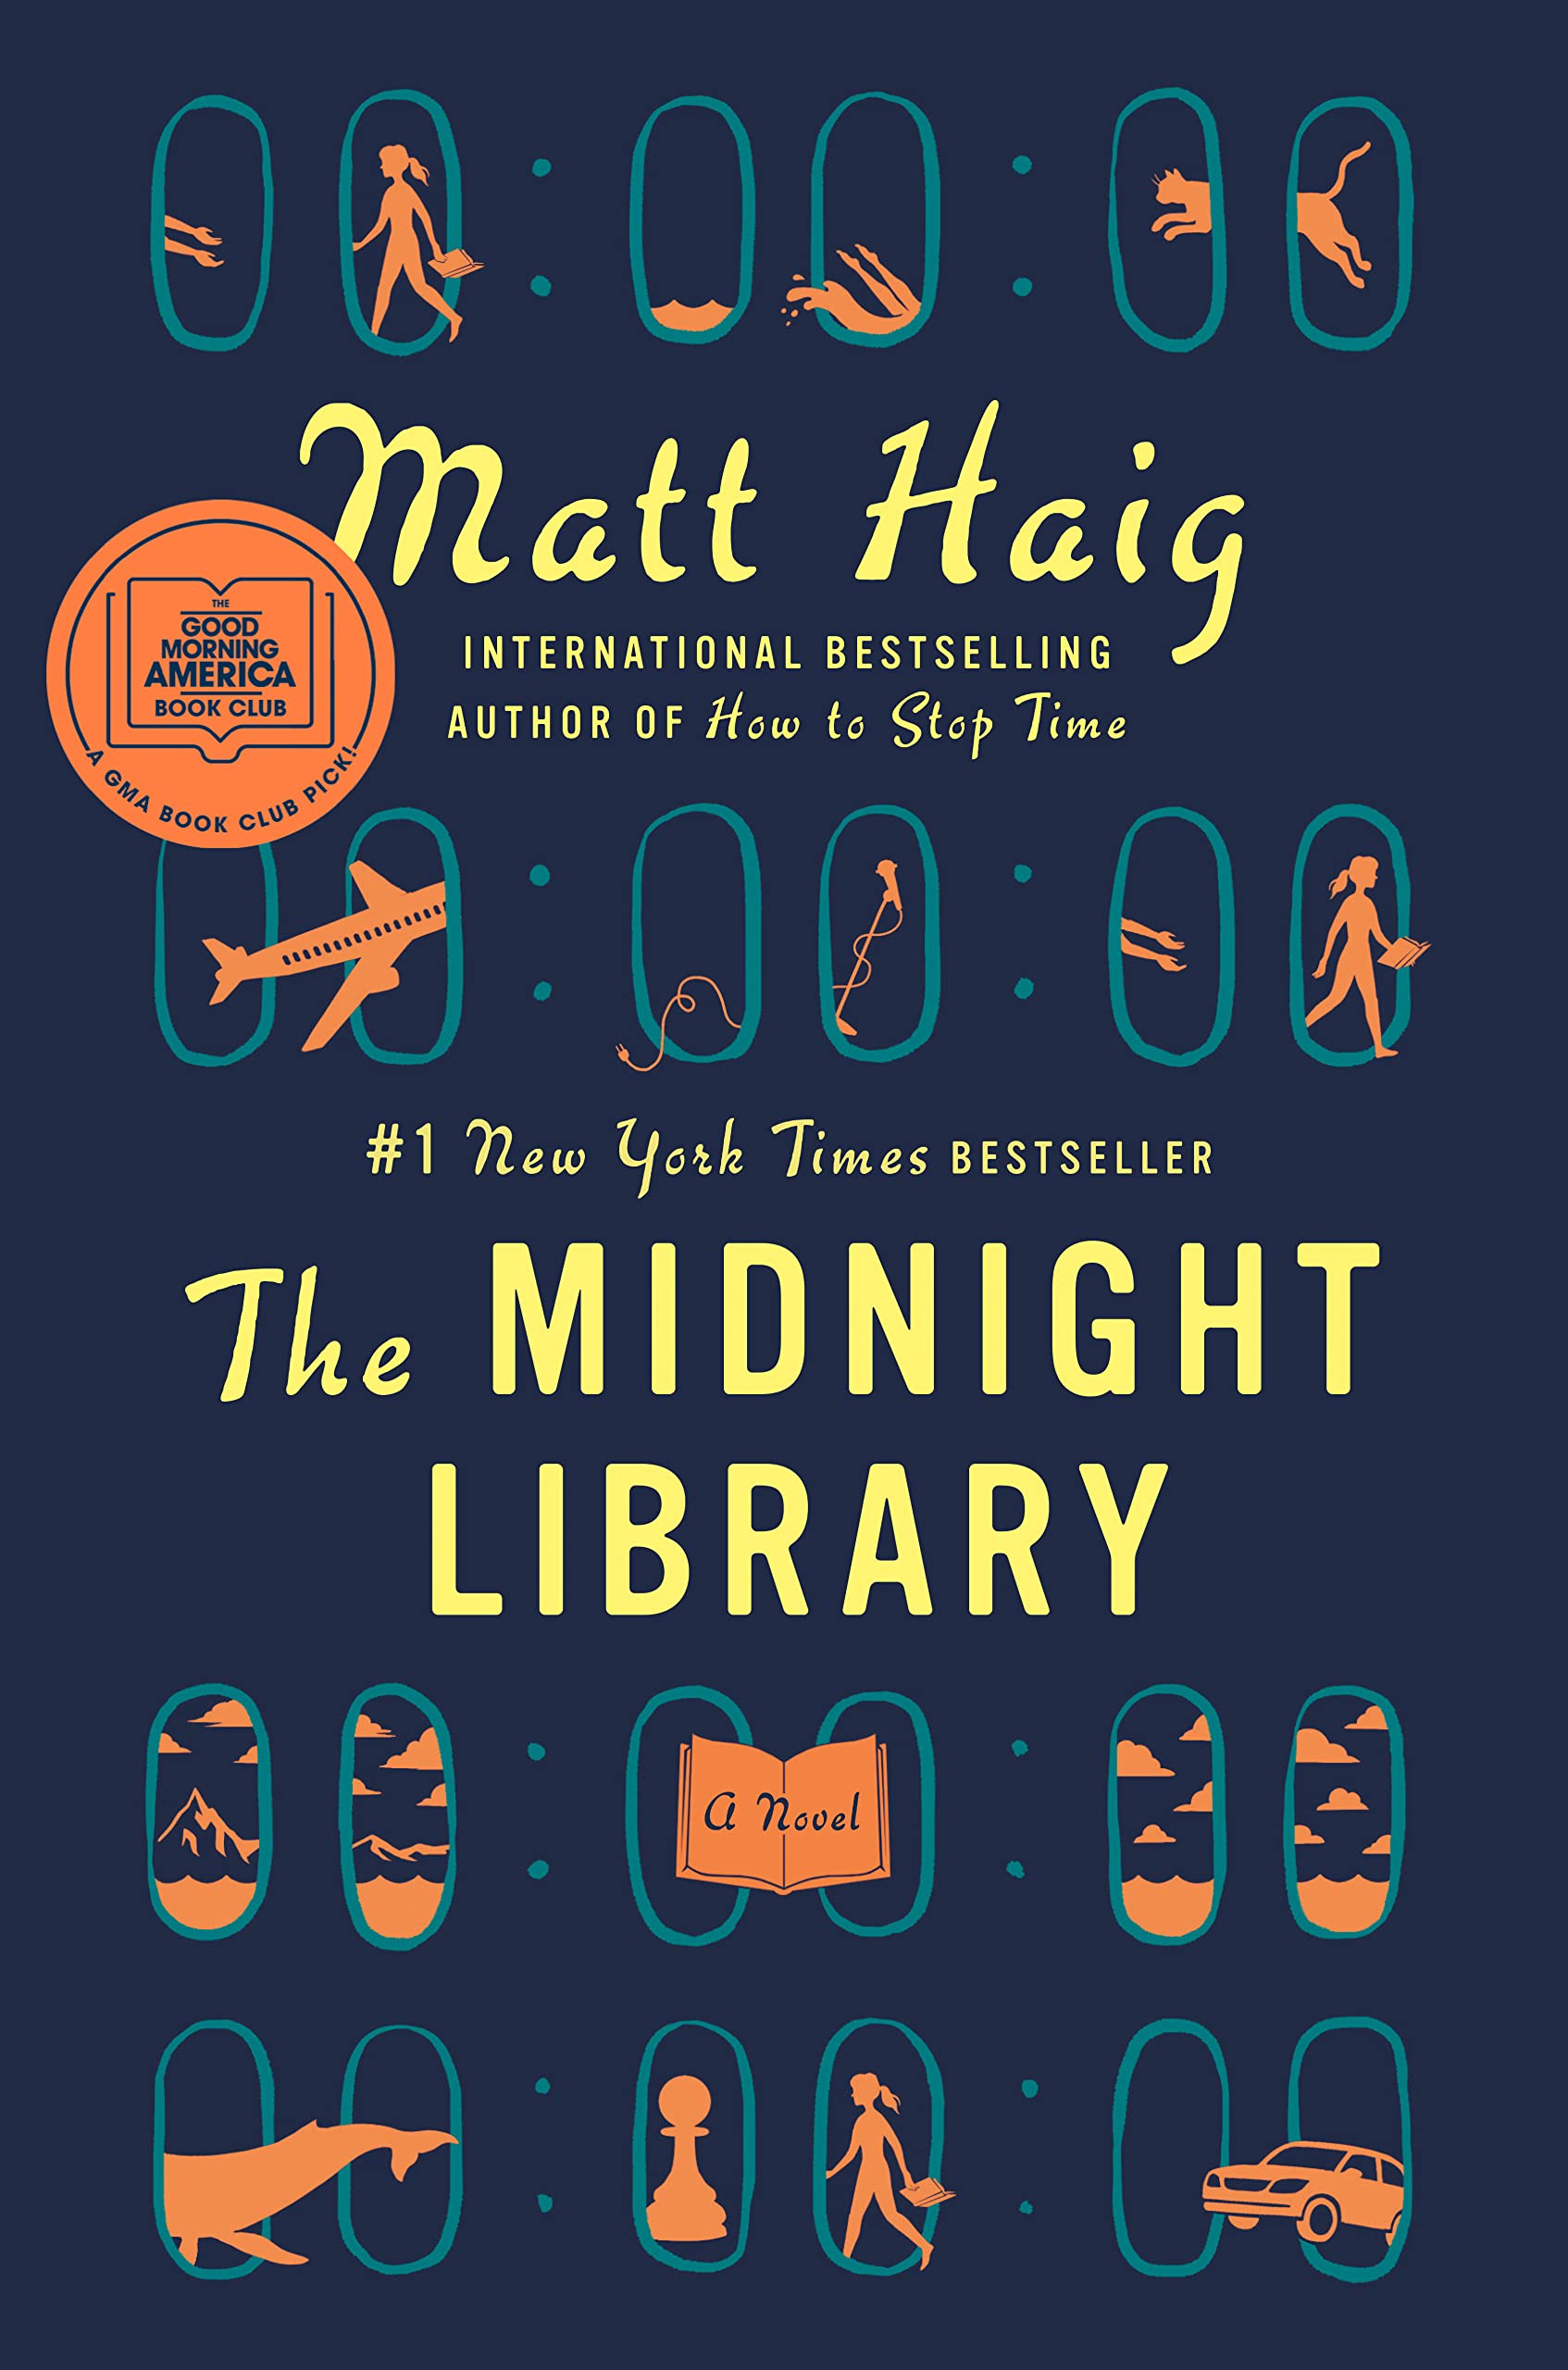 The book cover for The Midnight Library